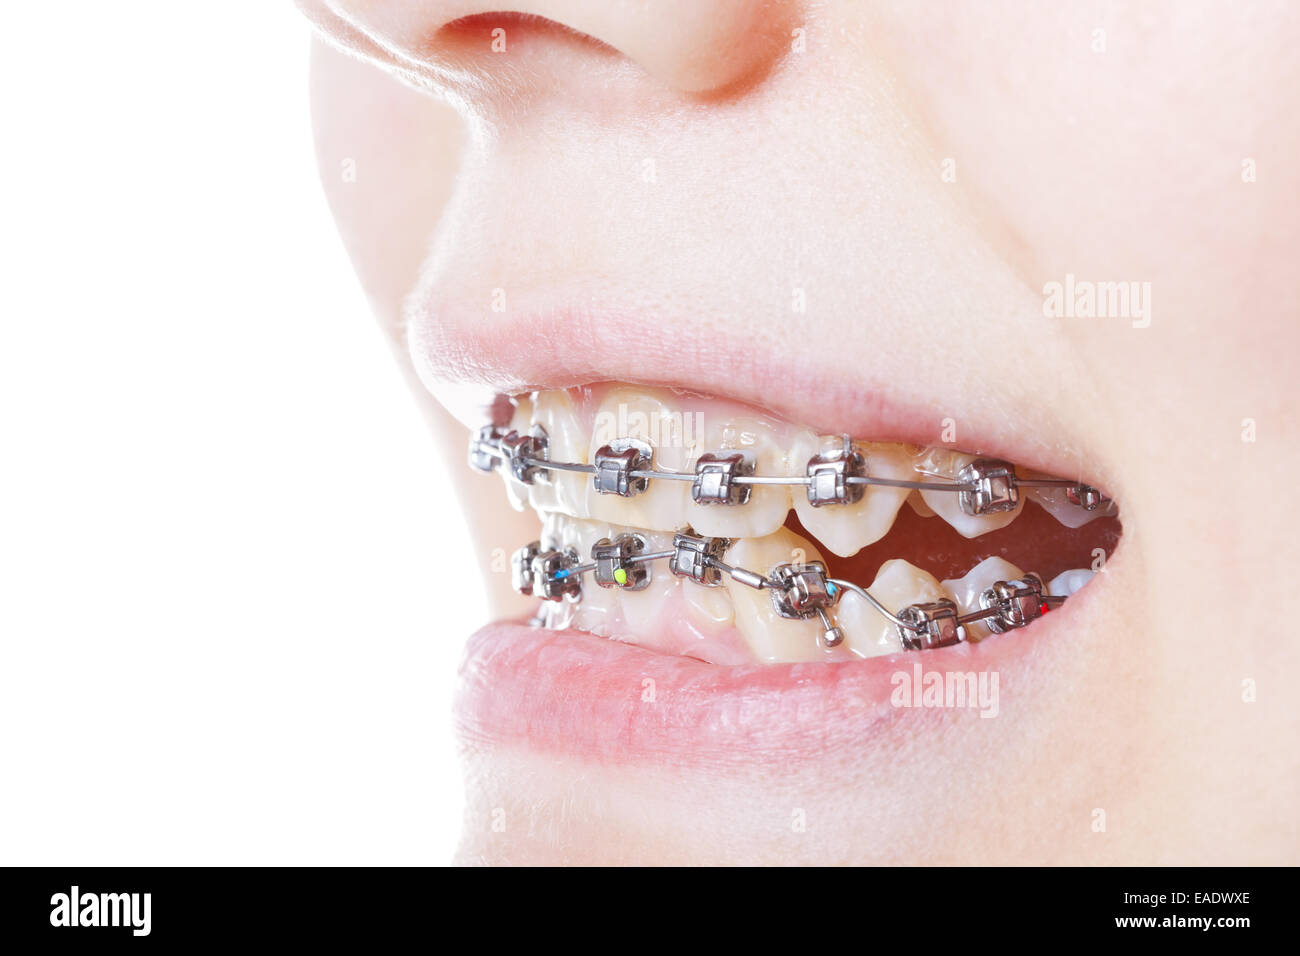 dental steel braces on teeth close up during orthodontic treatment Stock Photo